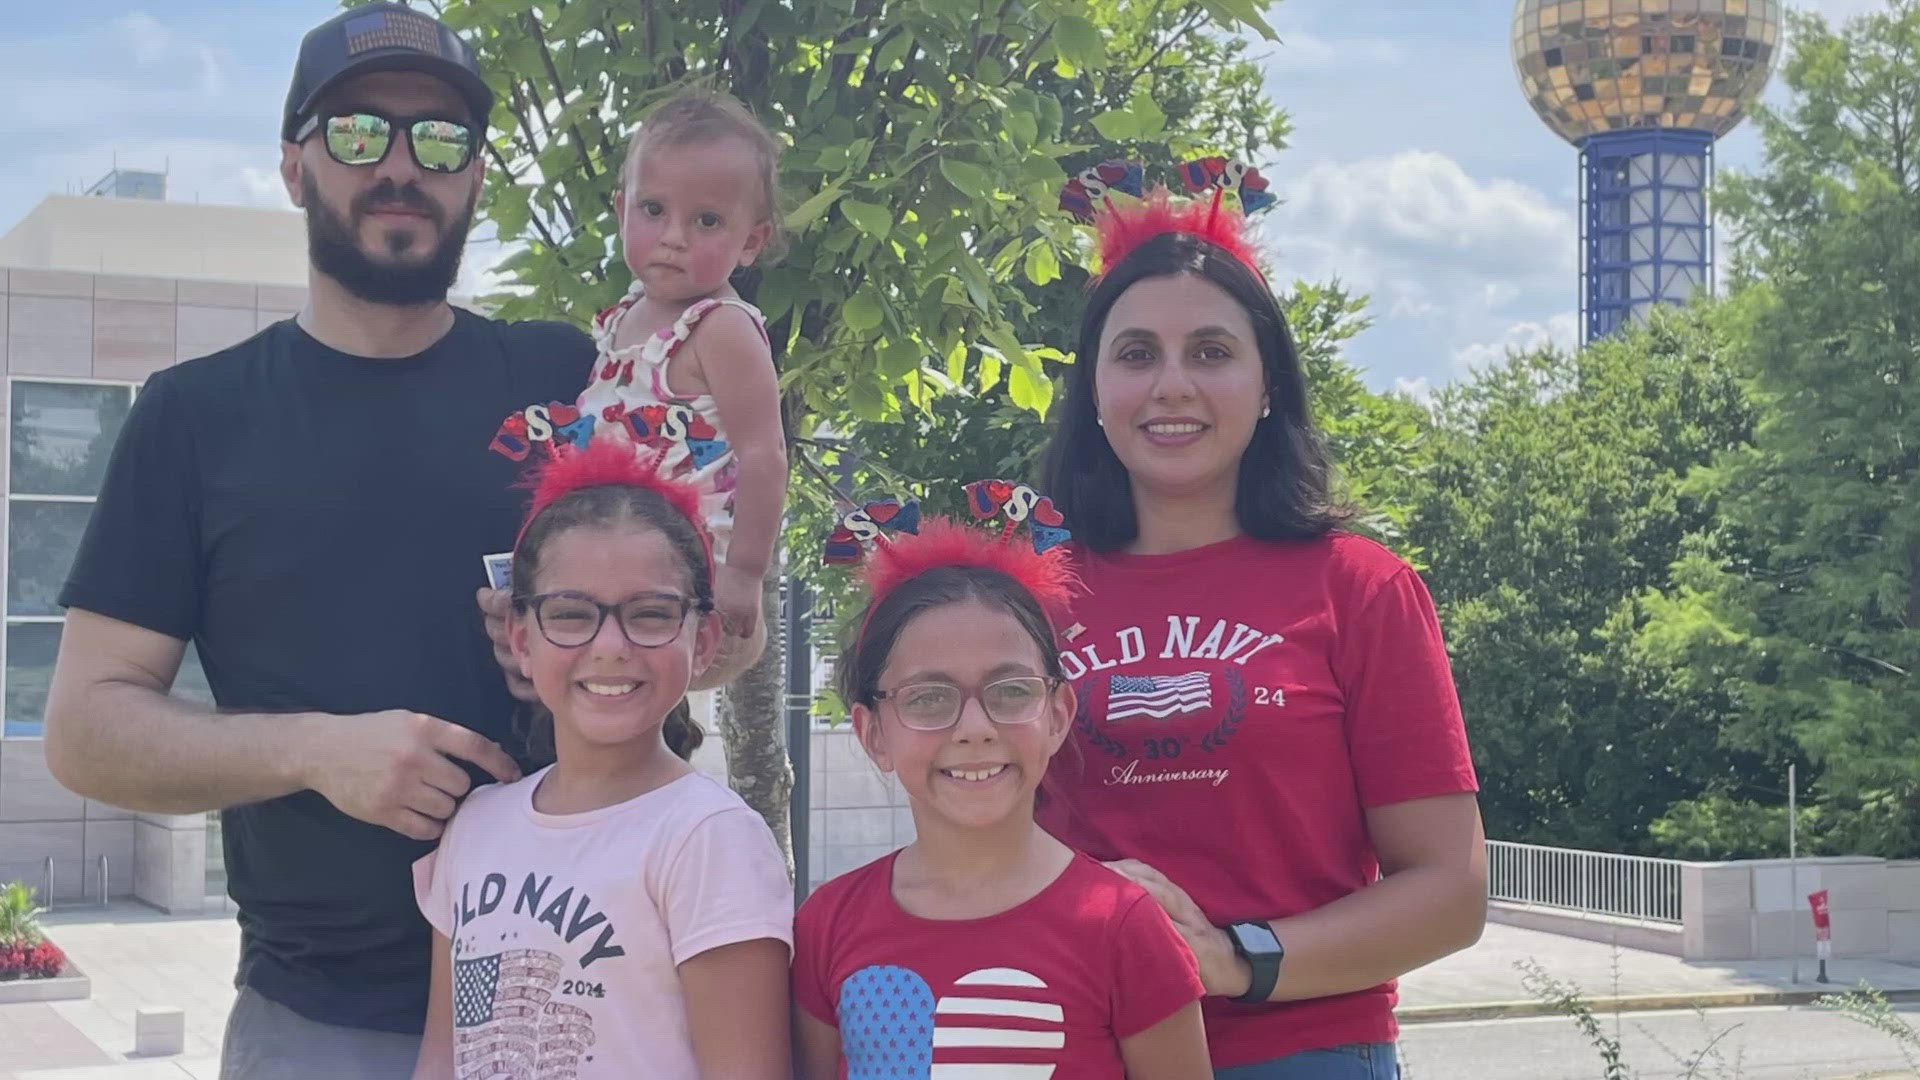 This Fourth of July is special for one family. A Palestinian mother recently became a U.S. citizen after arriving from the West Bank.